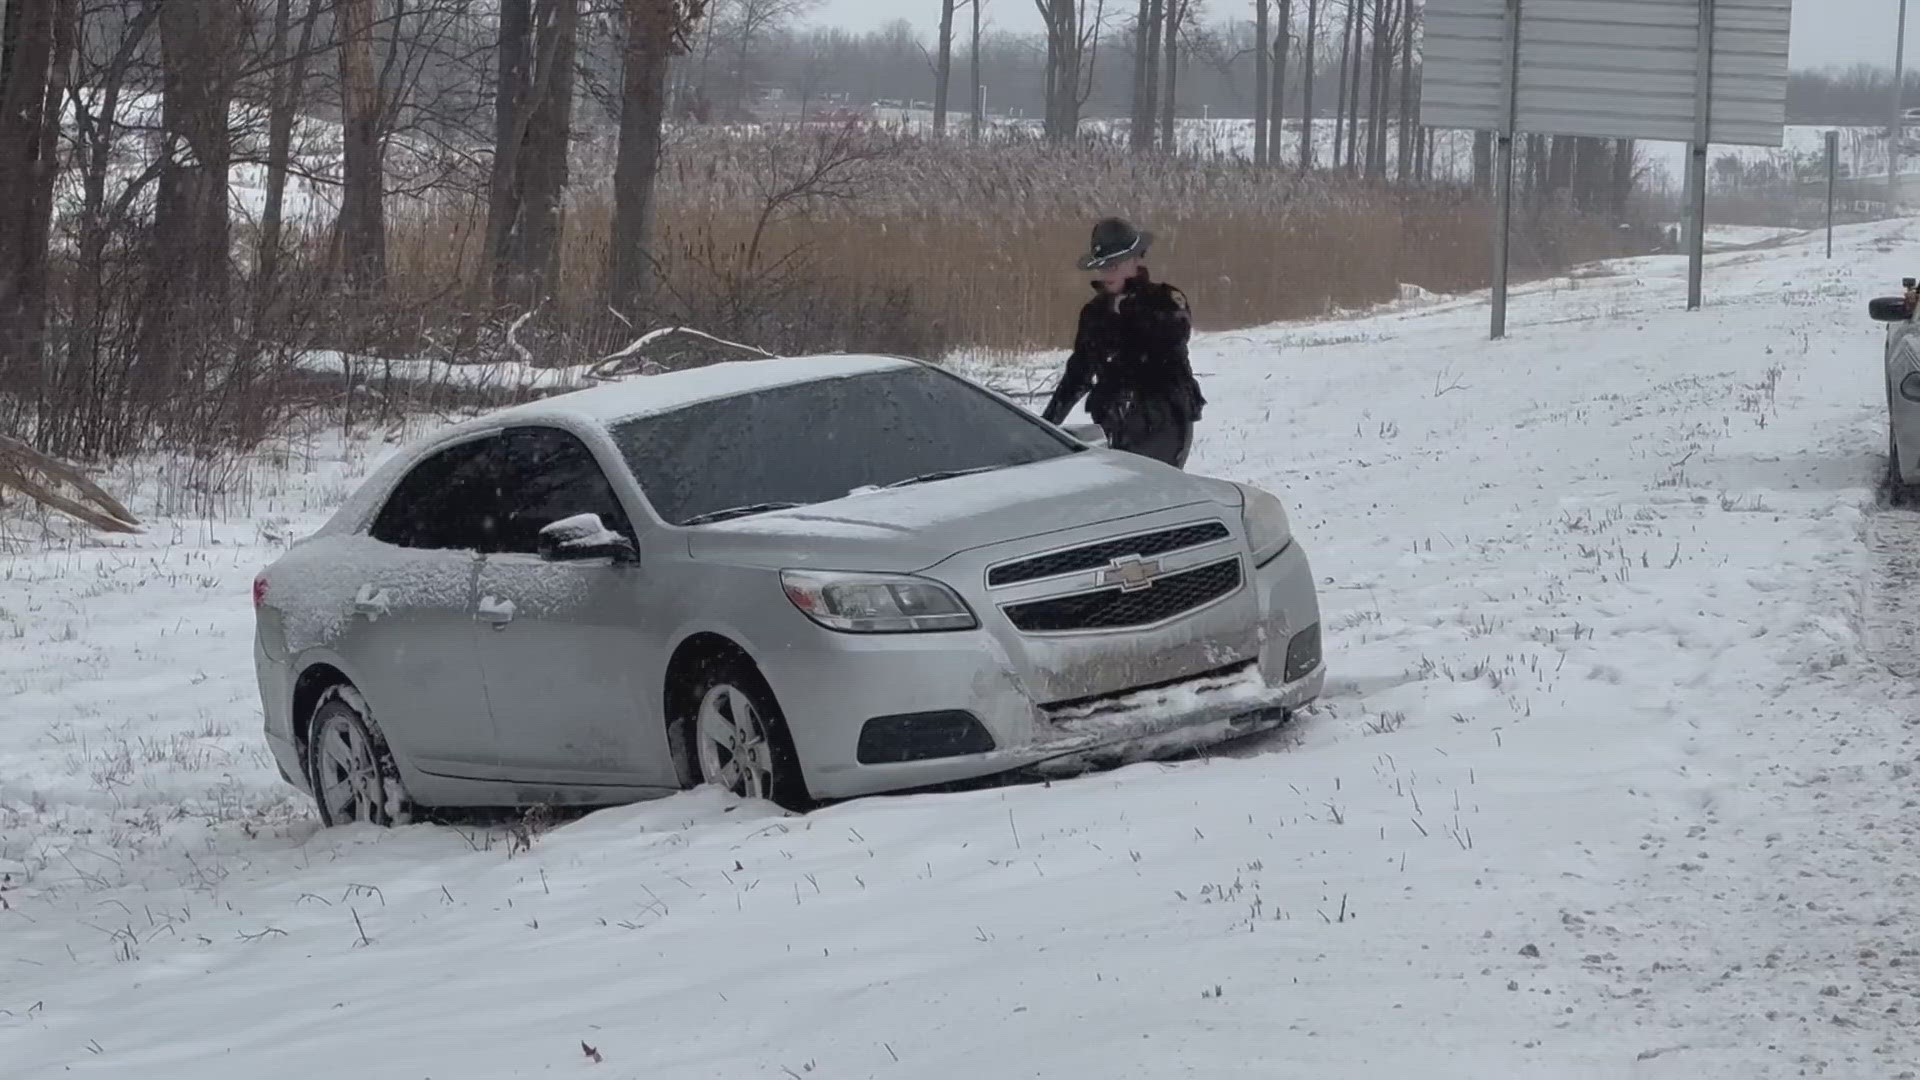 By 6 p.m. Friday, the patrol reported 14 crashes in Cuyahoga County, 16 crashes in Lorain County, and seven more in Medina and Summit counties combined.